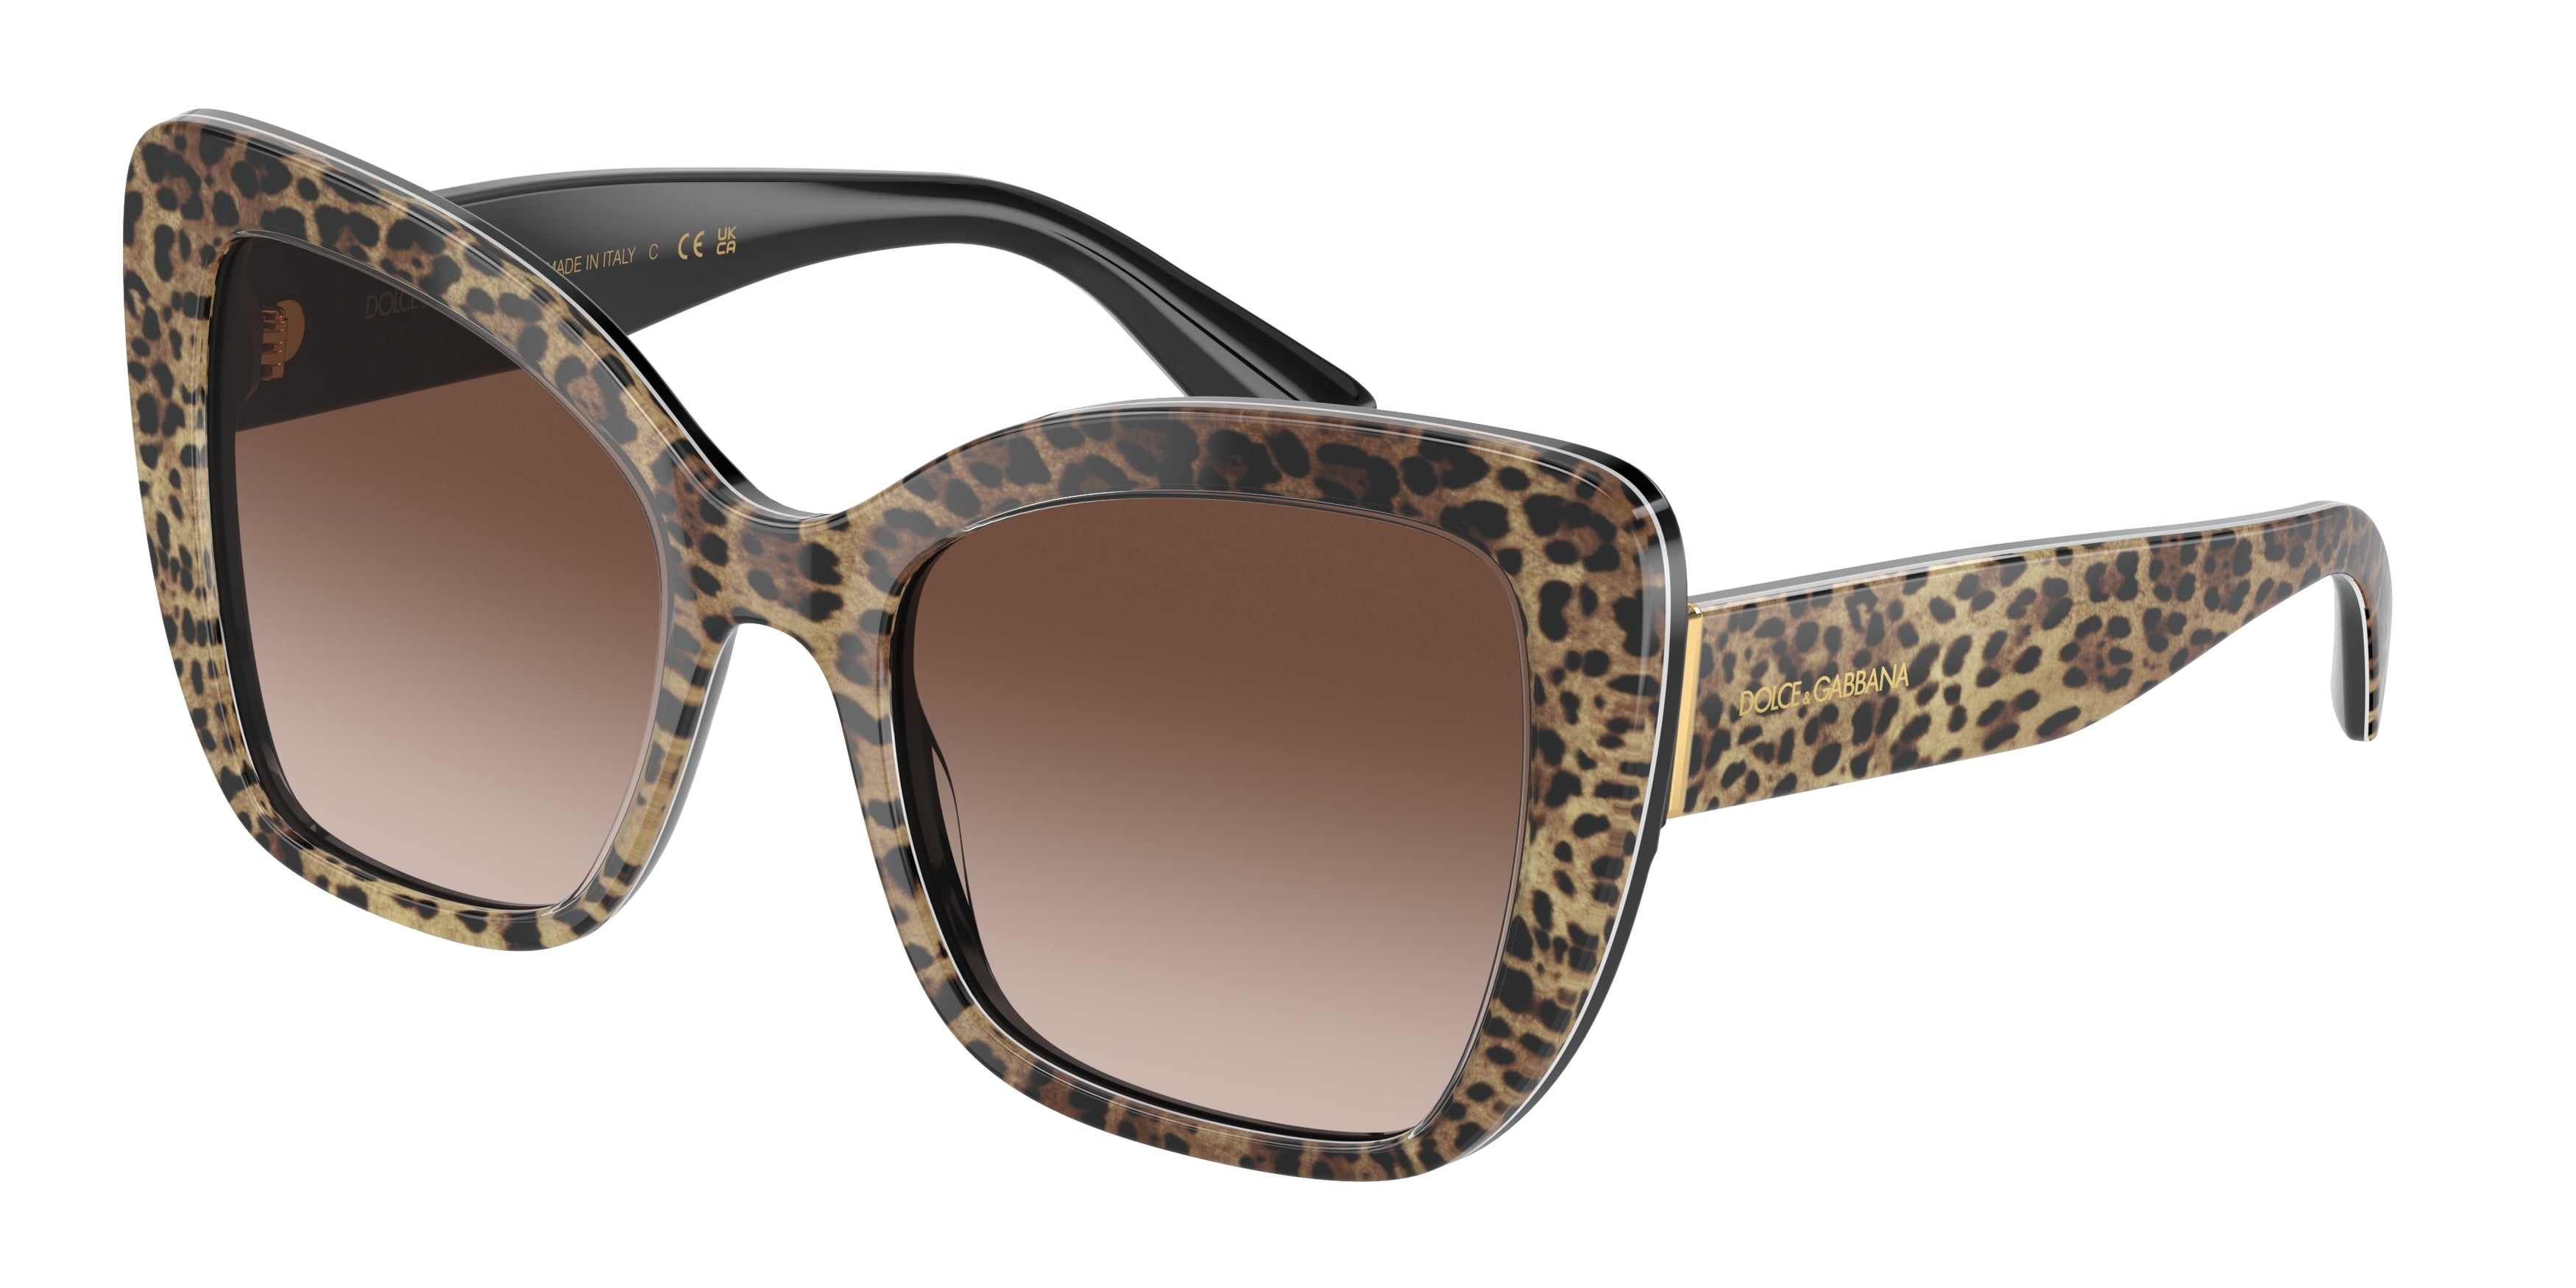 DOLCE & GABBANA DG4348 Butterfly Sunglasses  316313-Leo Brown On Black 54-140-20 - Color Map Brown